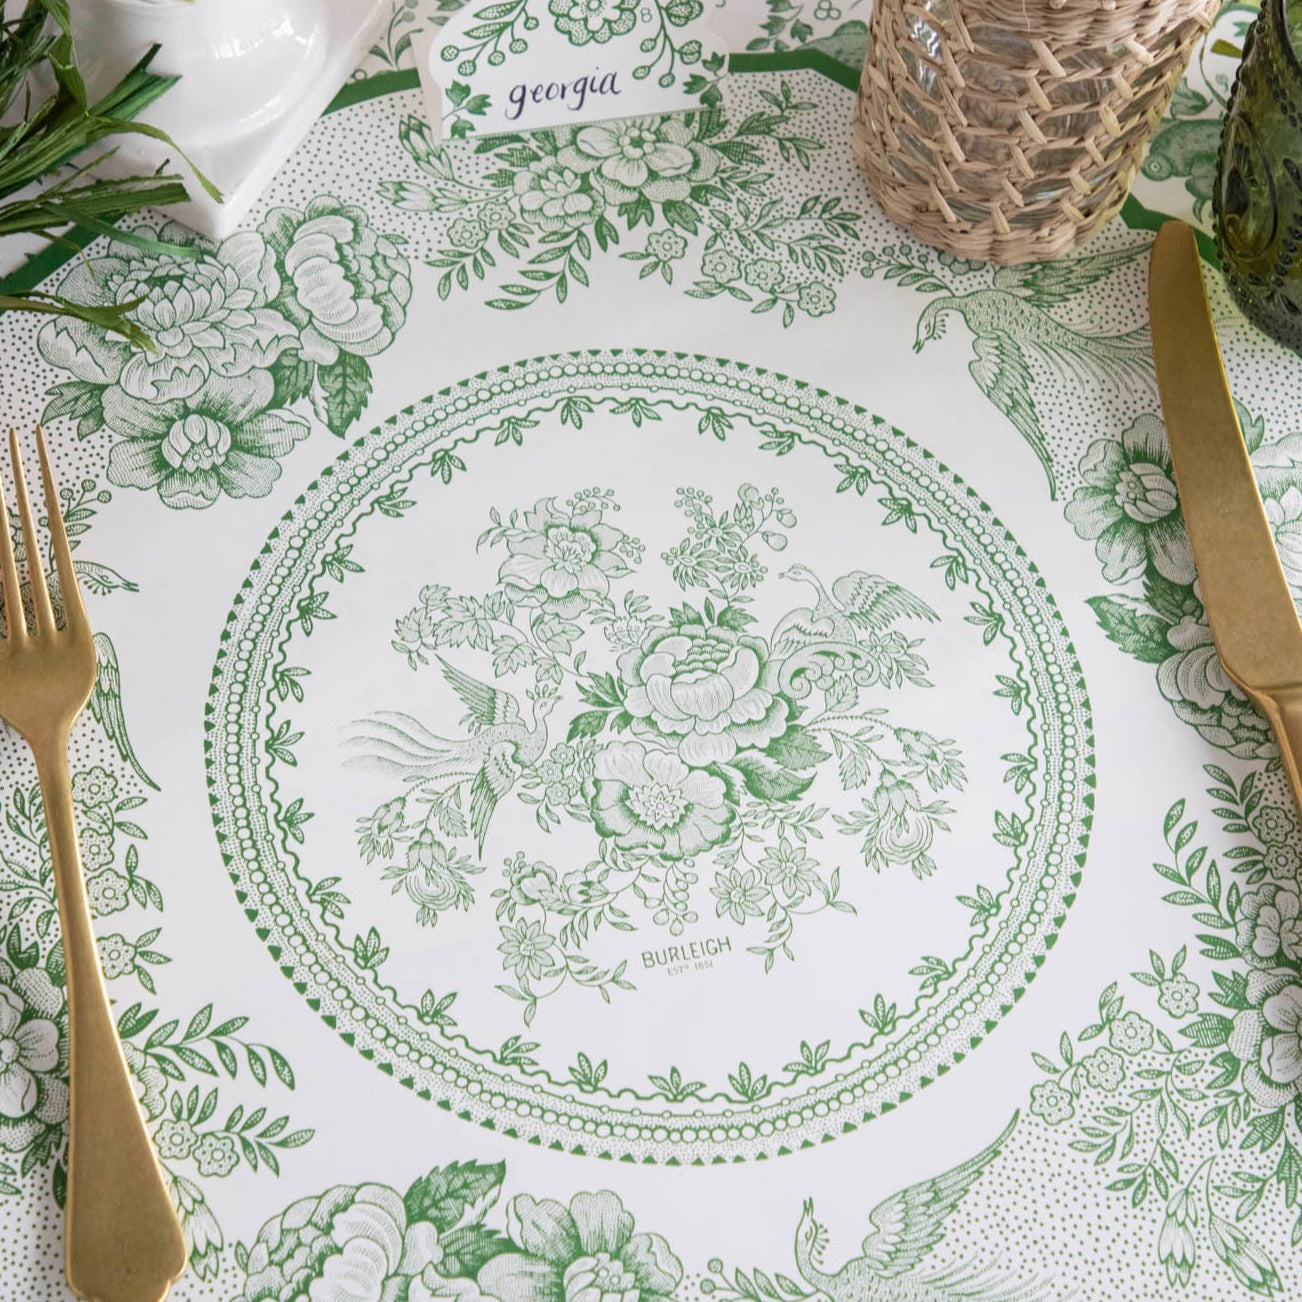 Close-up of the Die-cut Green Asiatic Pheasants Placemat in an elegant place setting, showing the artwork in detail.